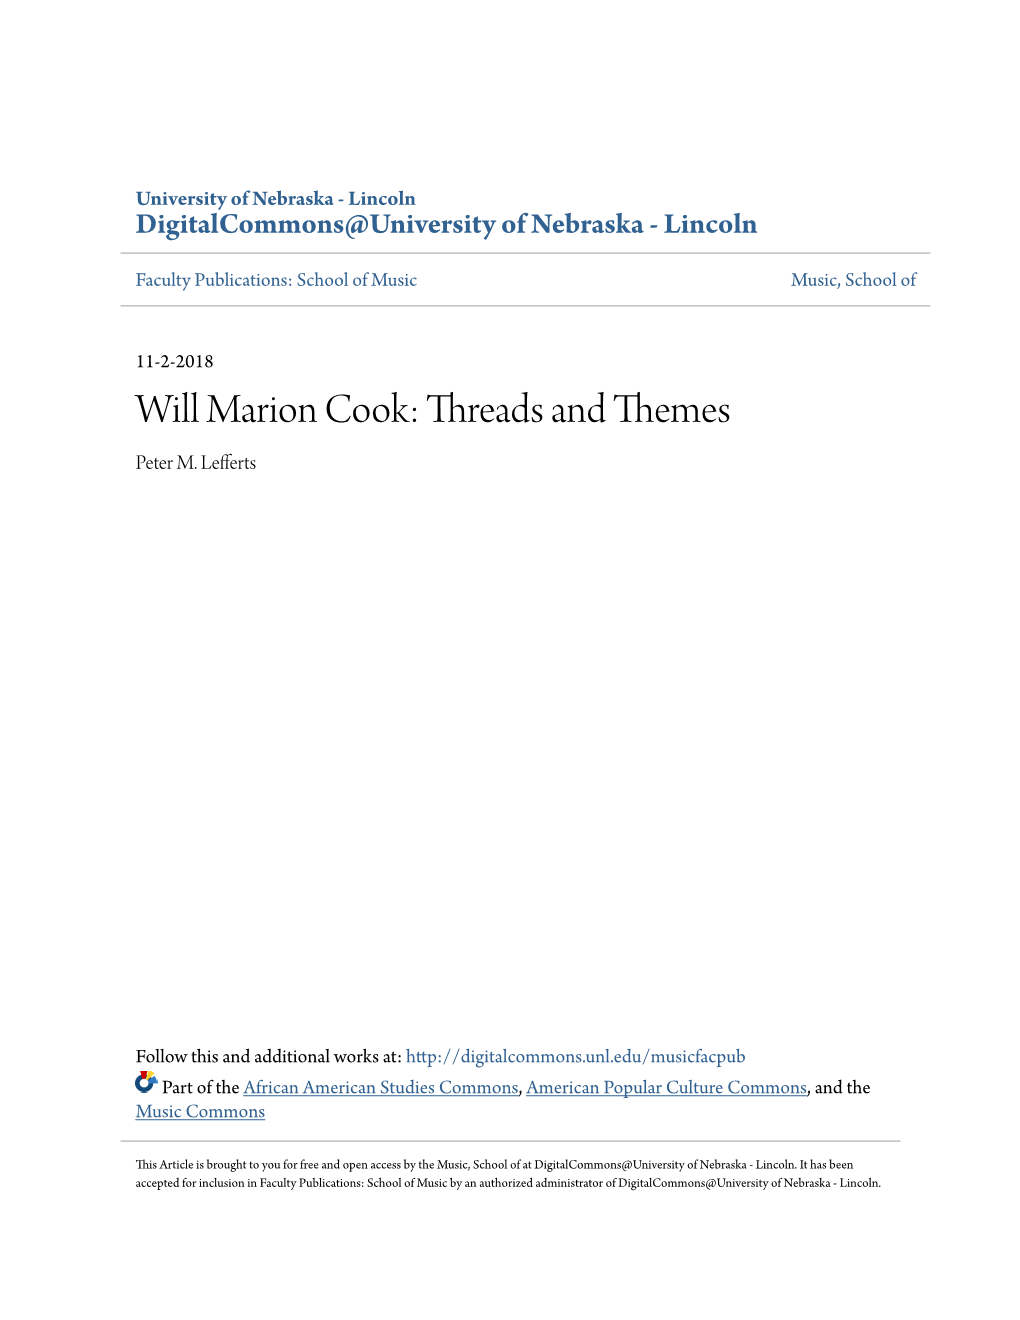 Will Marion Cook: Threads and Themes Peter M